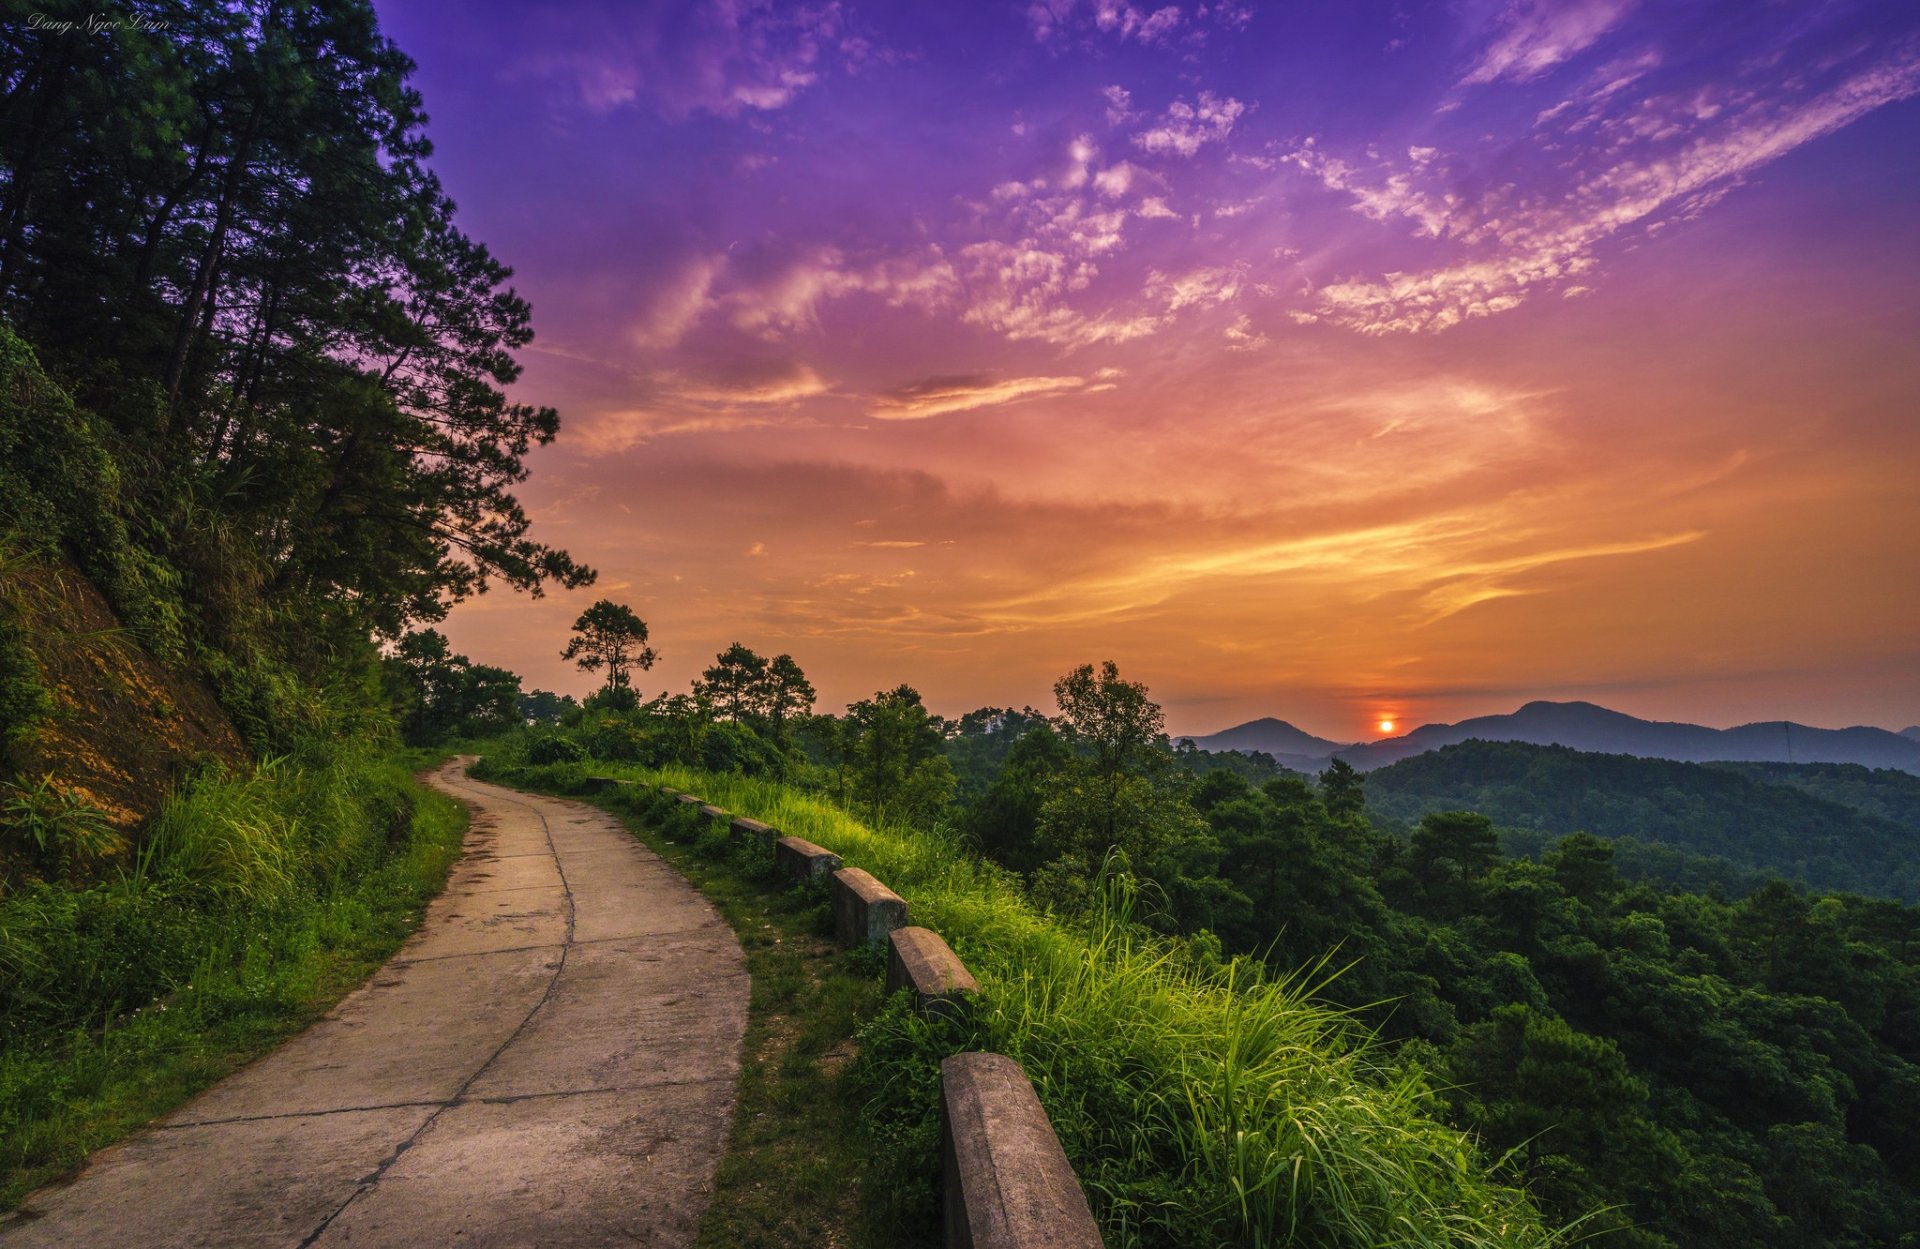 Mountain Road HD Wallpaper | Background Image | 2048x1332 | ID:736239 ...